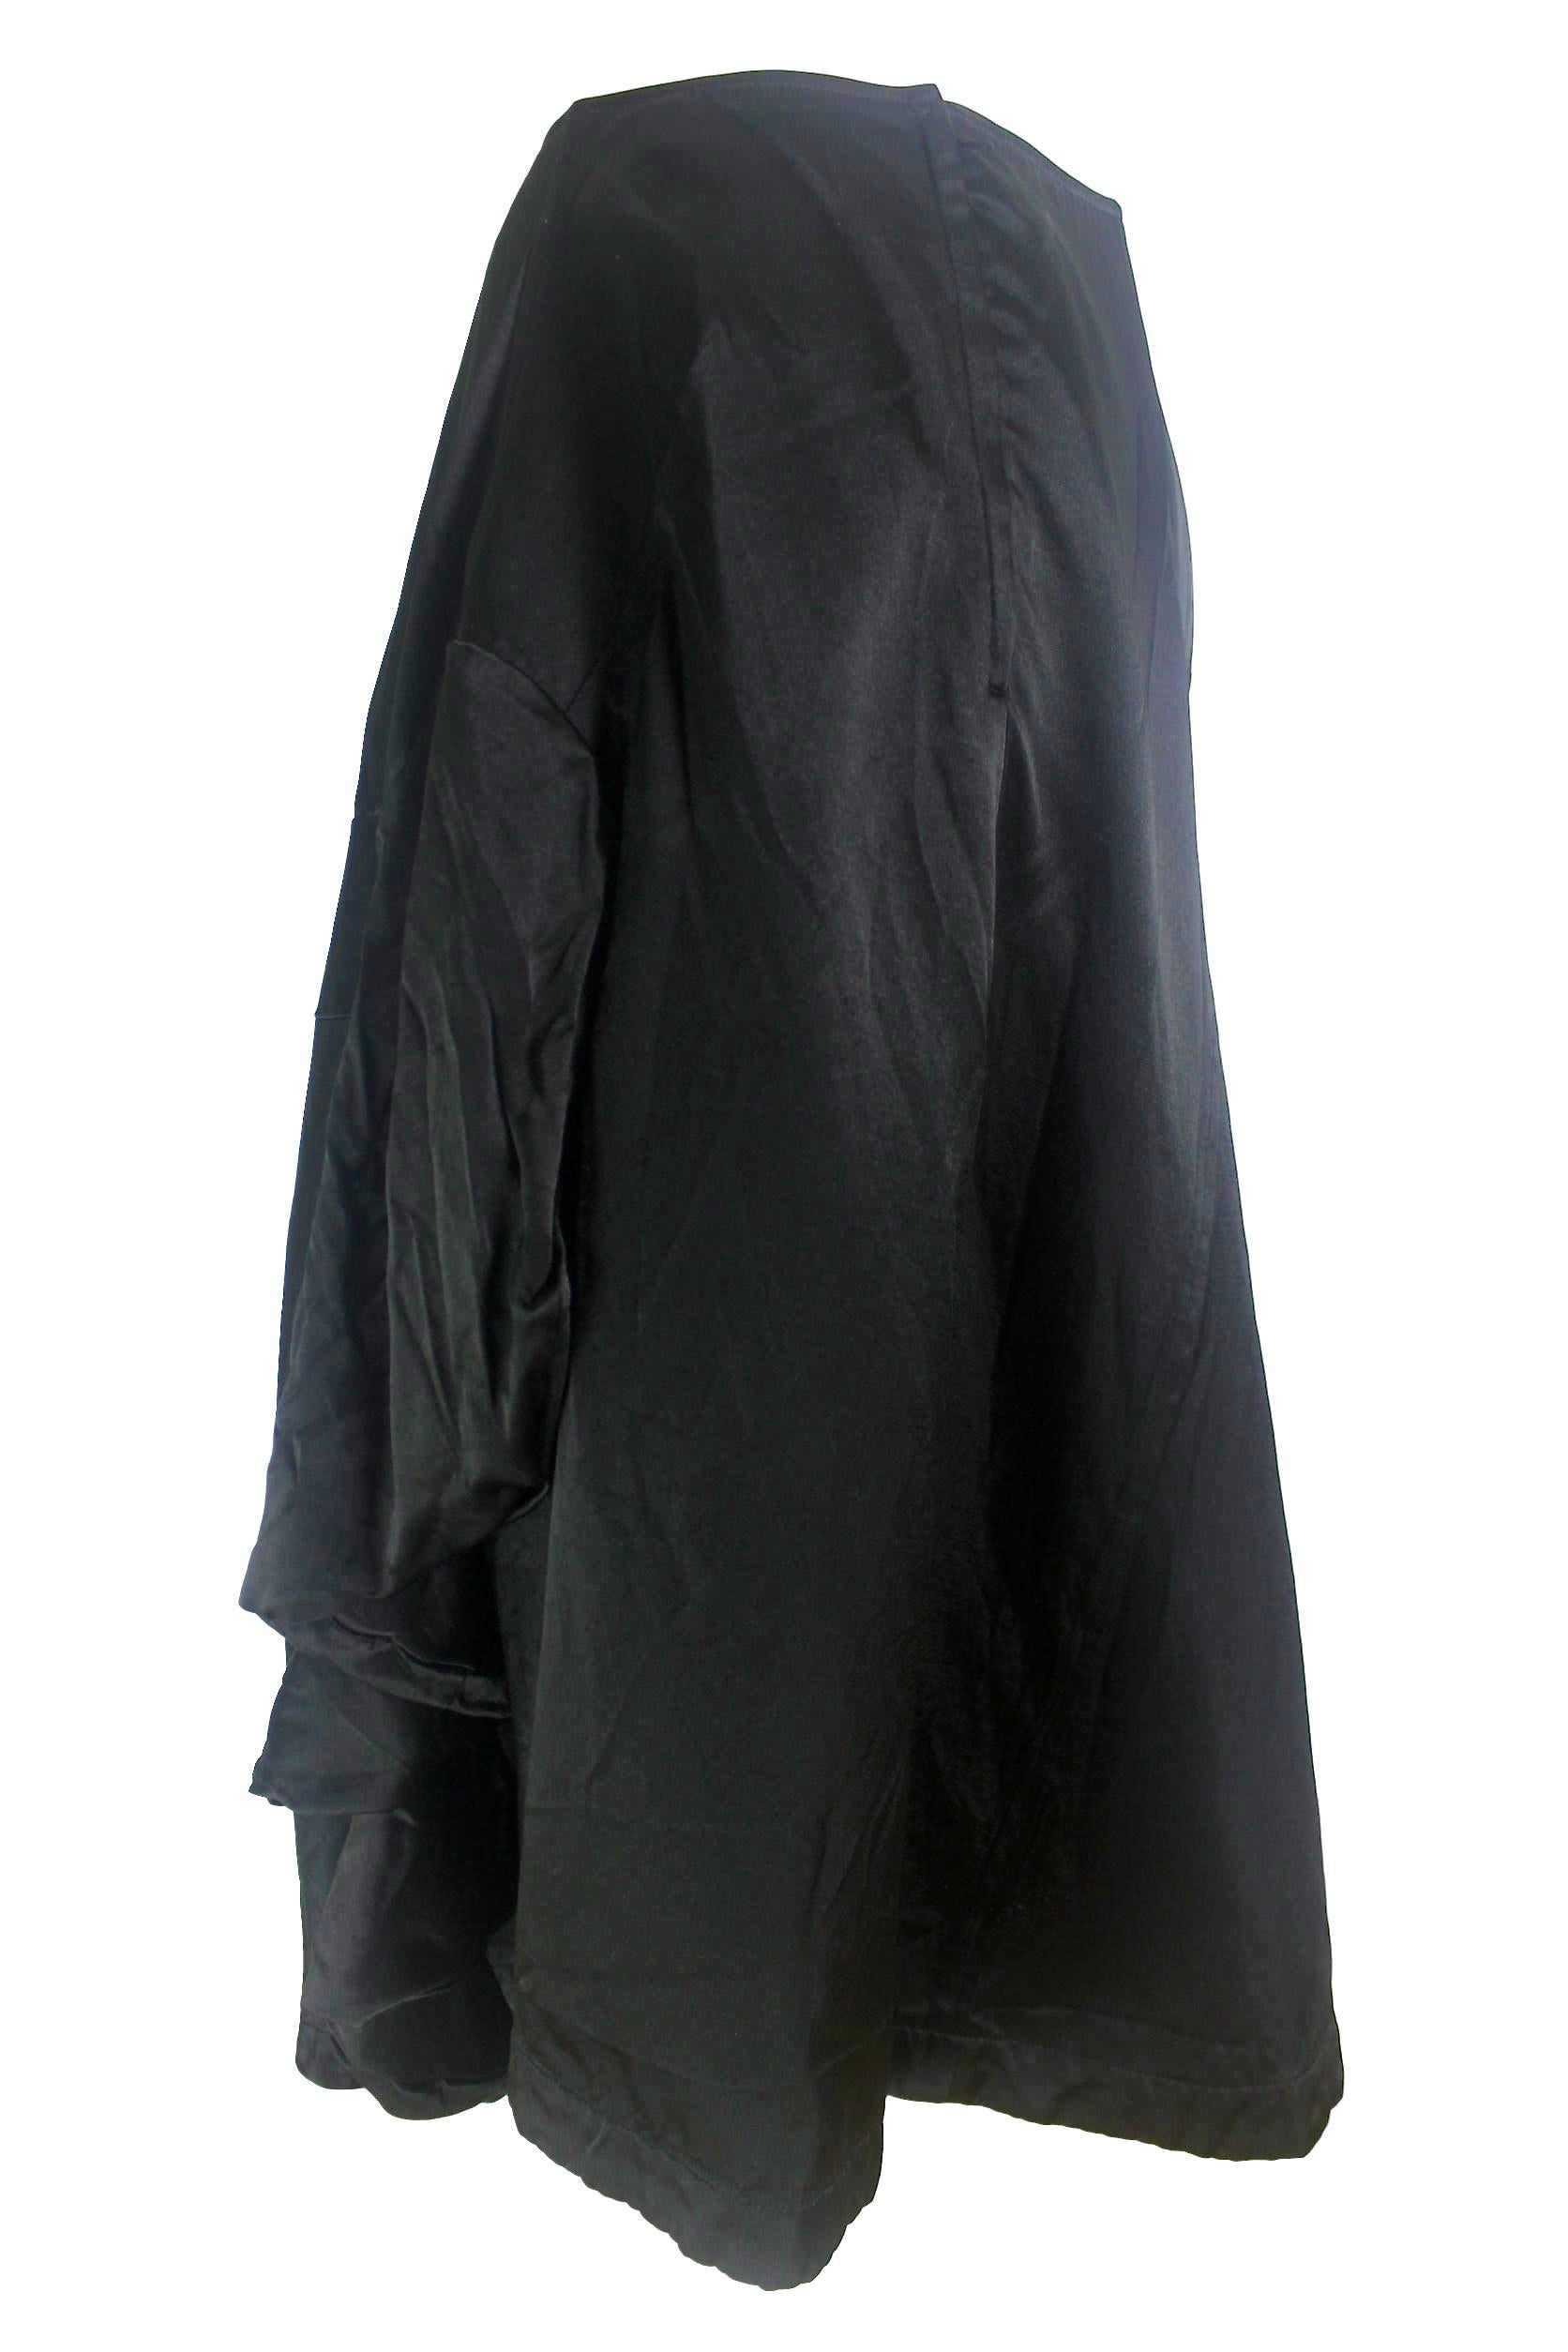 Comme des Garcons Wool/Silk Twisted Sleeve Skirt AD 2004 Dark Romance In Good Condition For Sale In Bath, GB